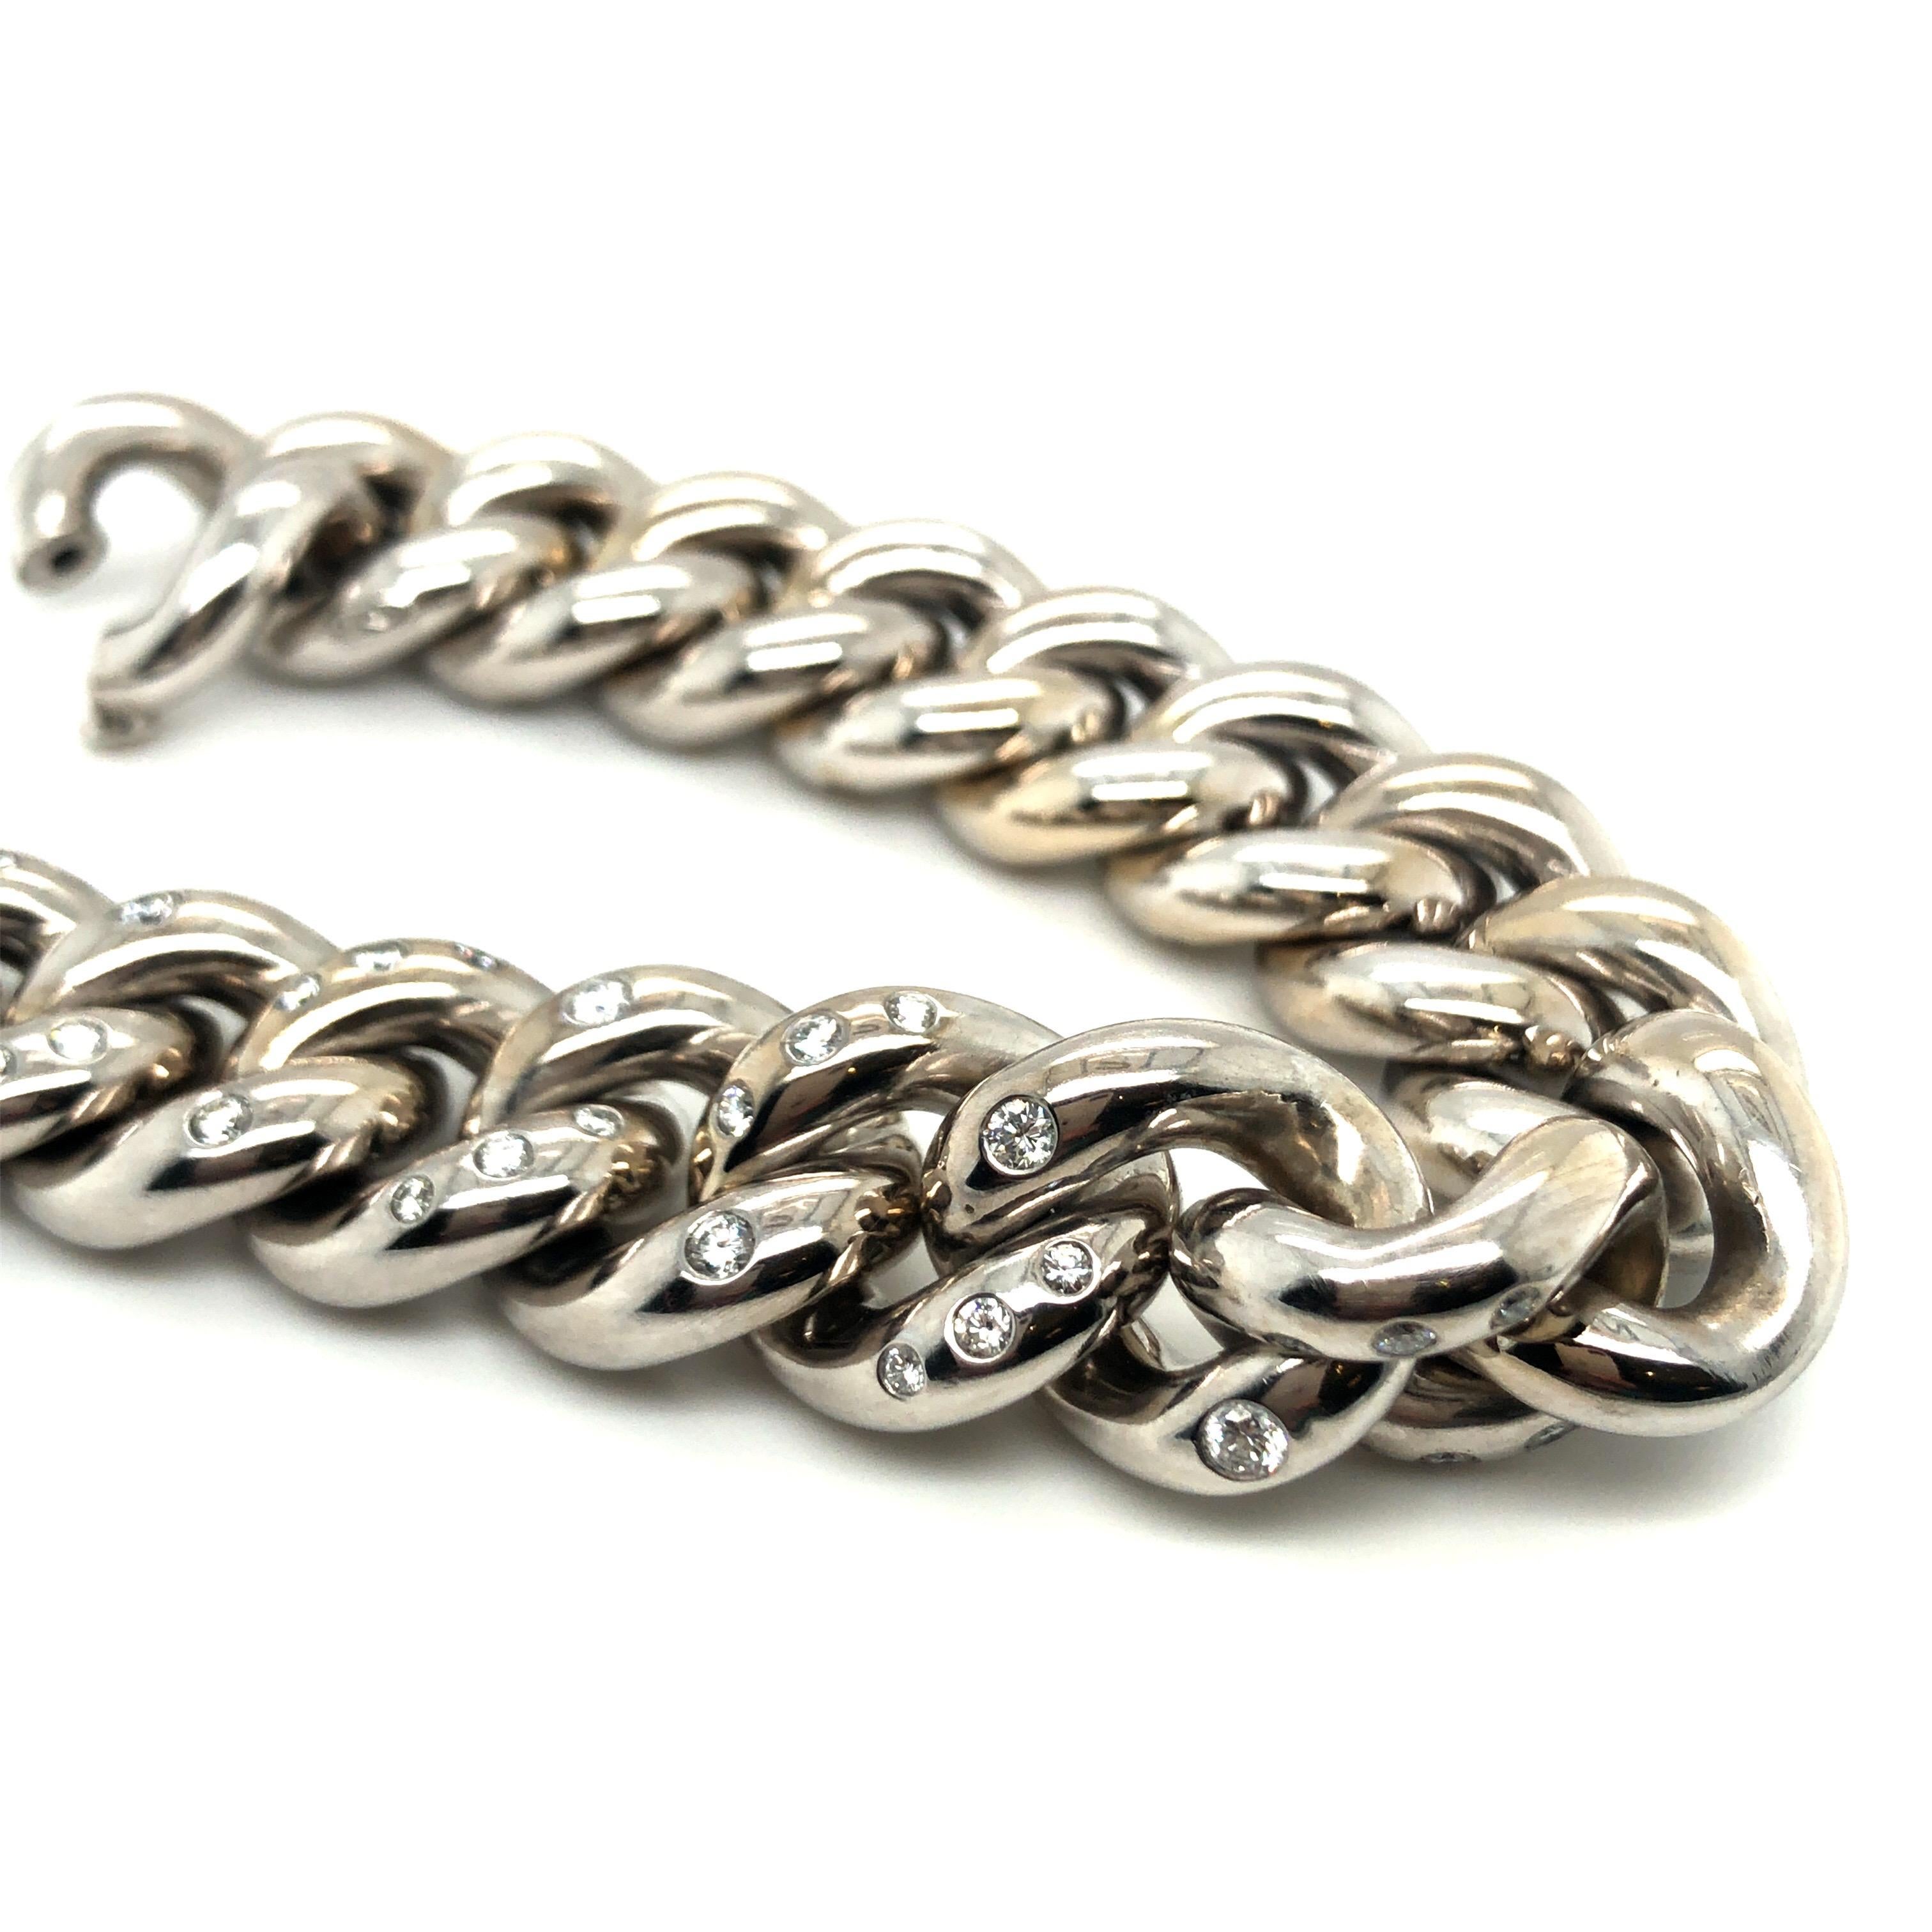 Stylish 18 karat white gold curb chain bracelet, set with 74 brilliant-cut diamonds totalling circa 3.28 ct. The bracelet fastens with a secure clasp, which is disguised seamlessly within the final link.
This fabulous statement jewel is in very good